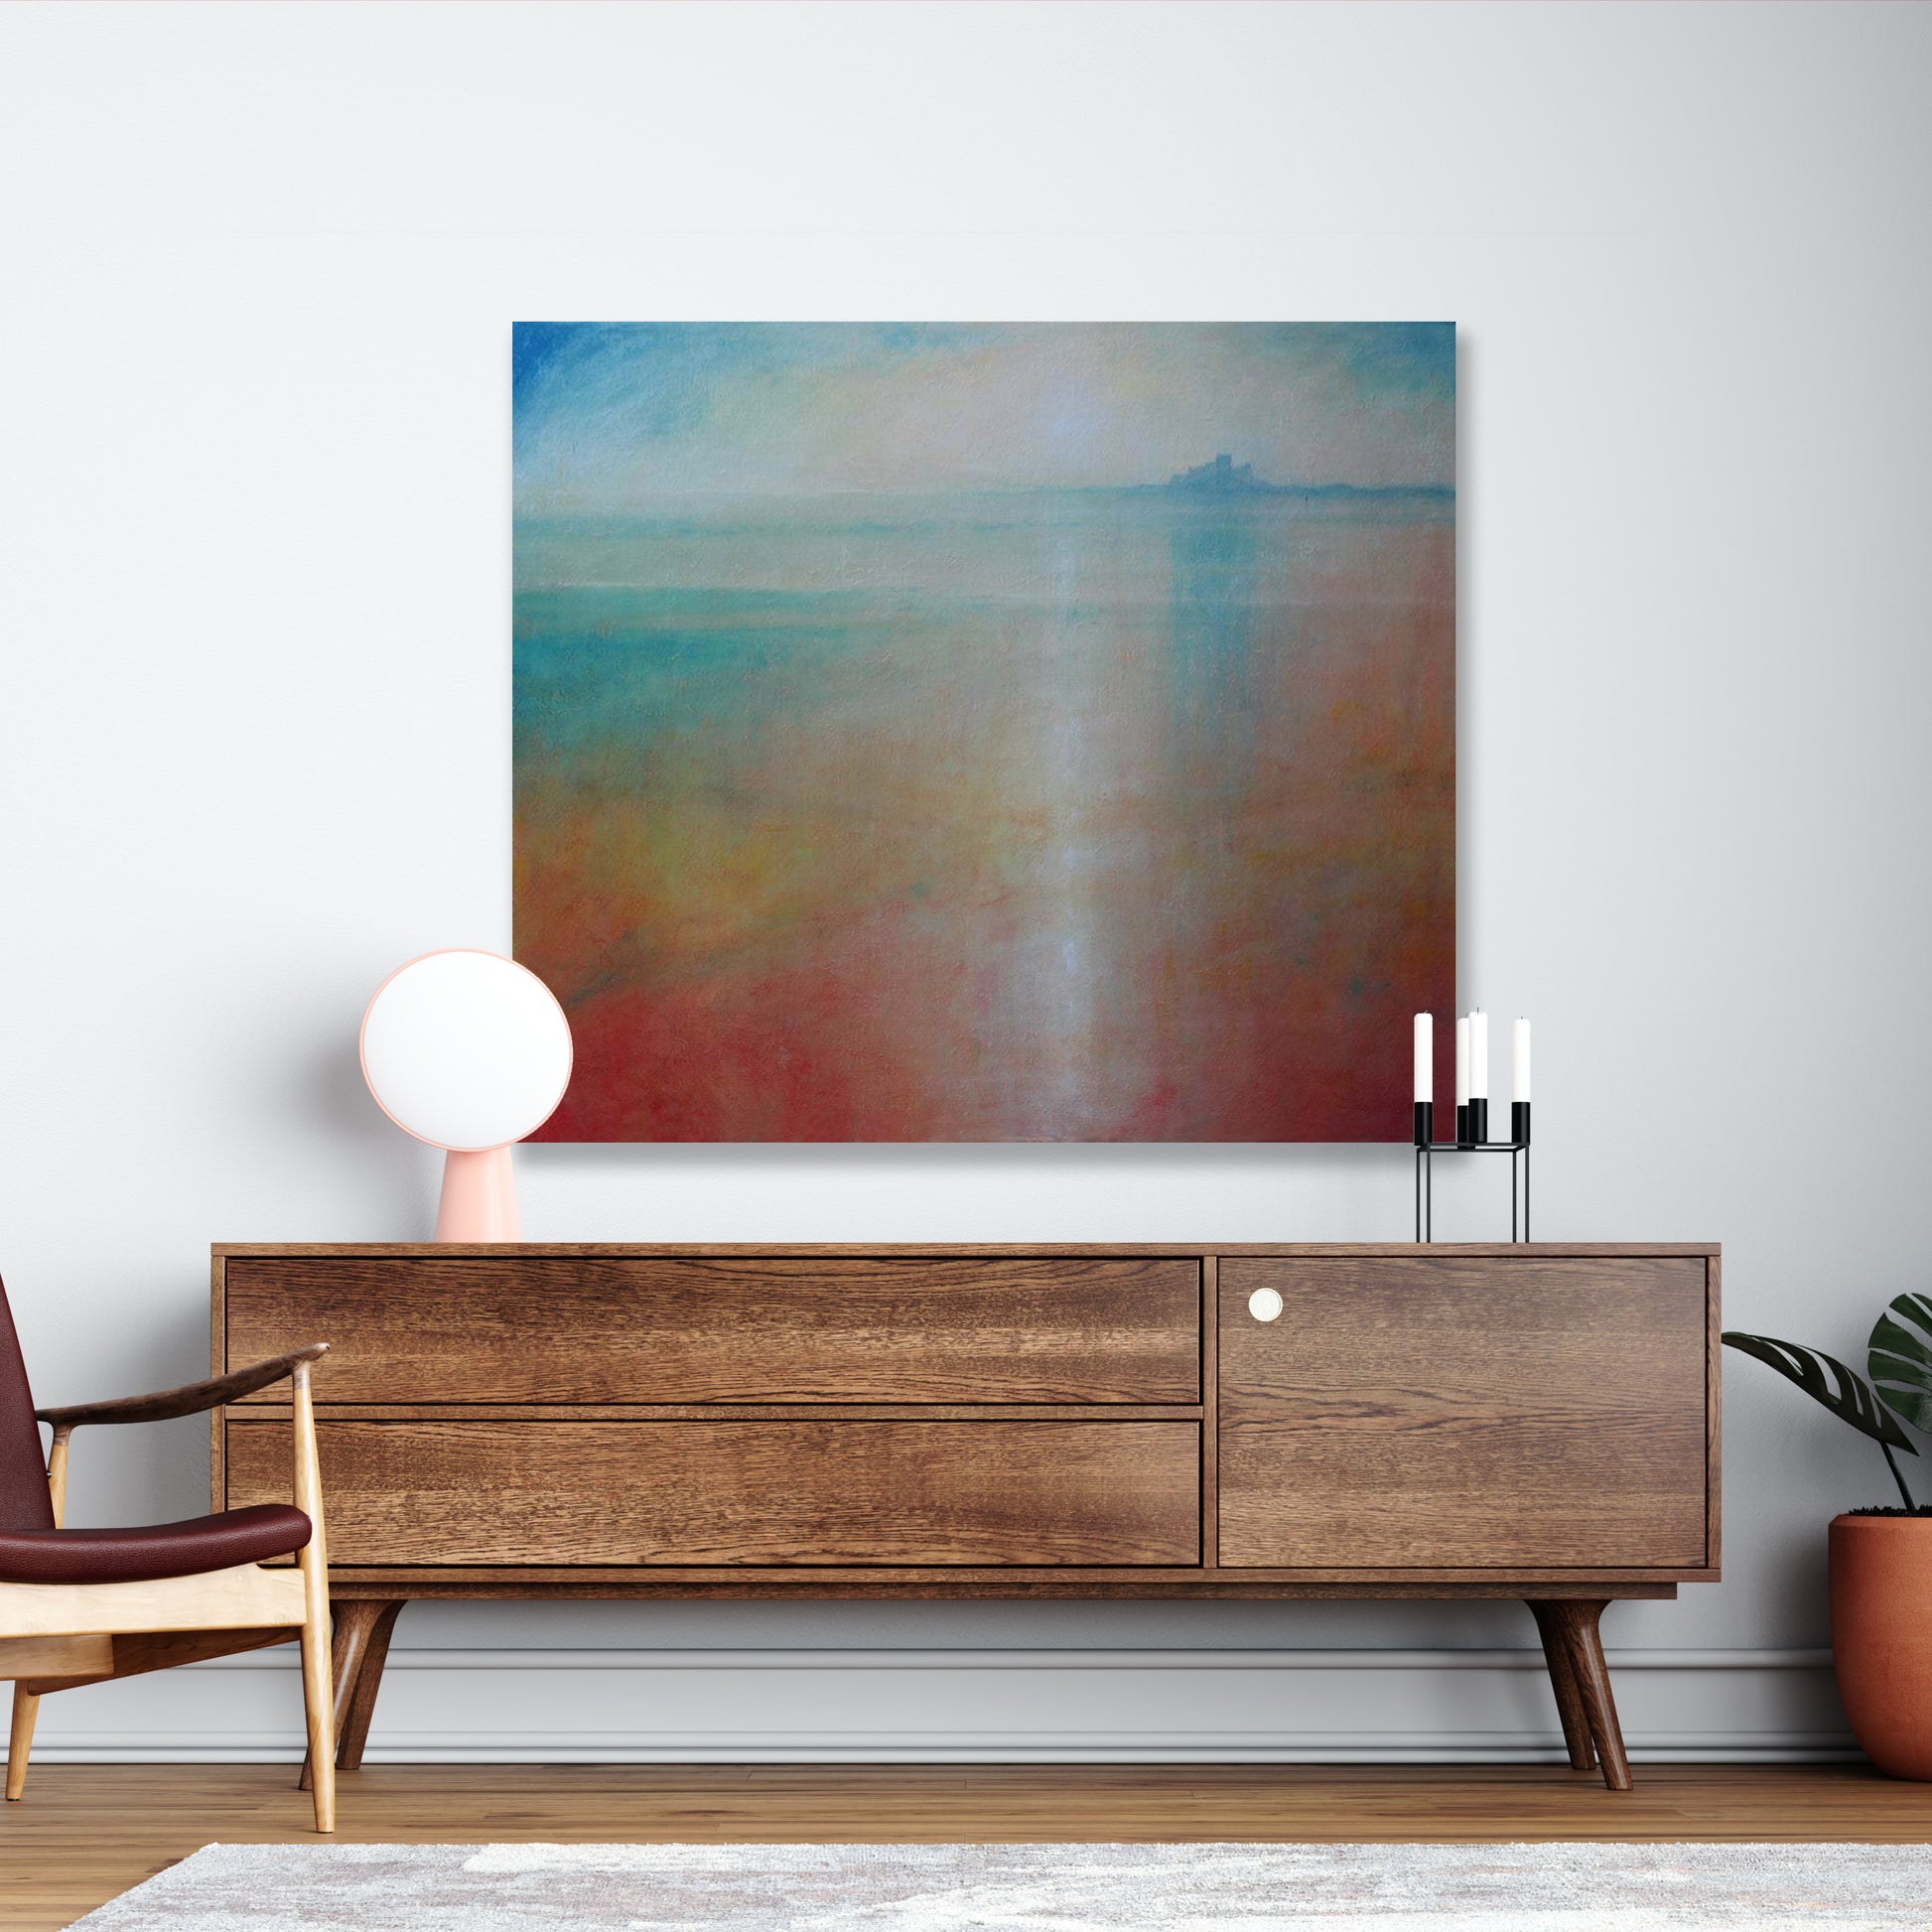 Sunset Canvas Art, Seascape Painting, Ocean Wall Art, Scenery Canvas Art Print, Sunset Art Prints, Bamburgh Wall Art, Signed by Artist